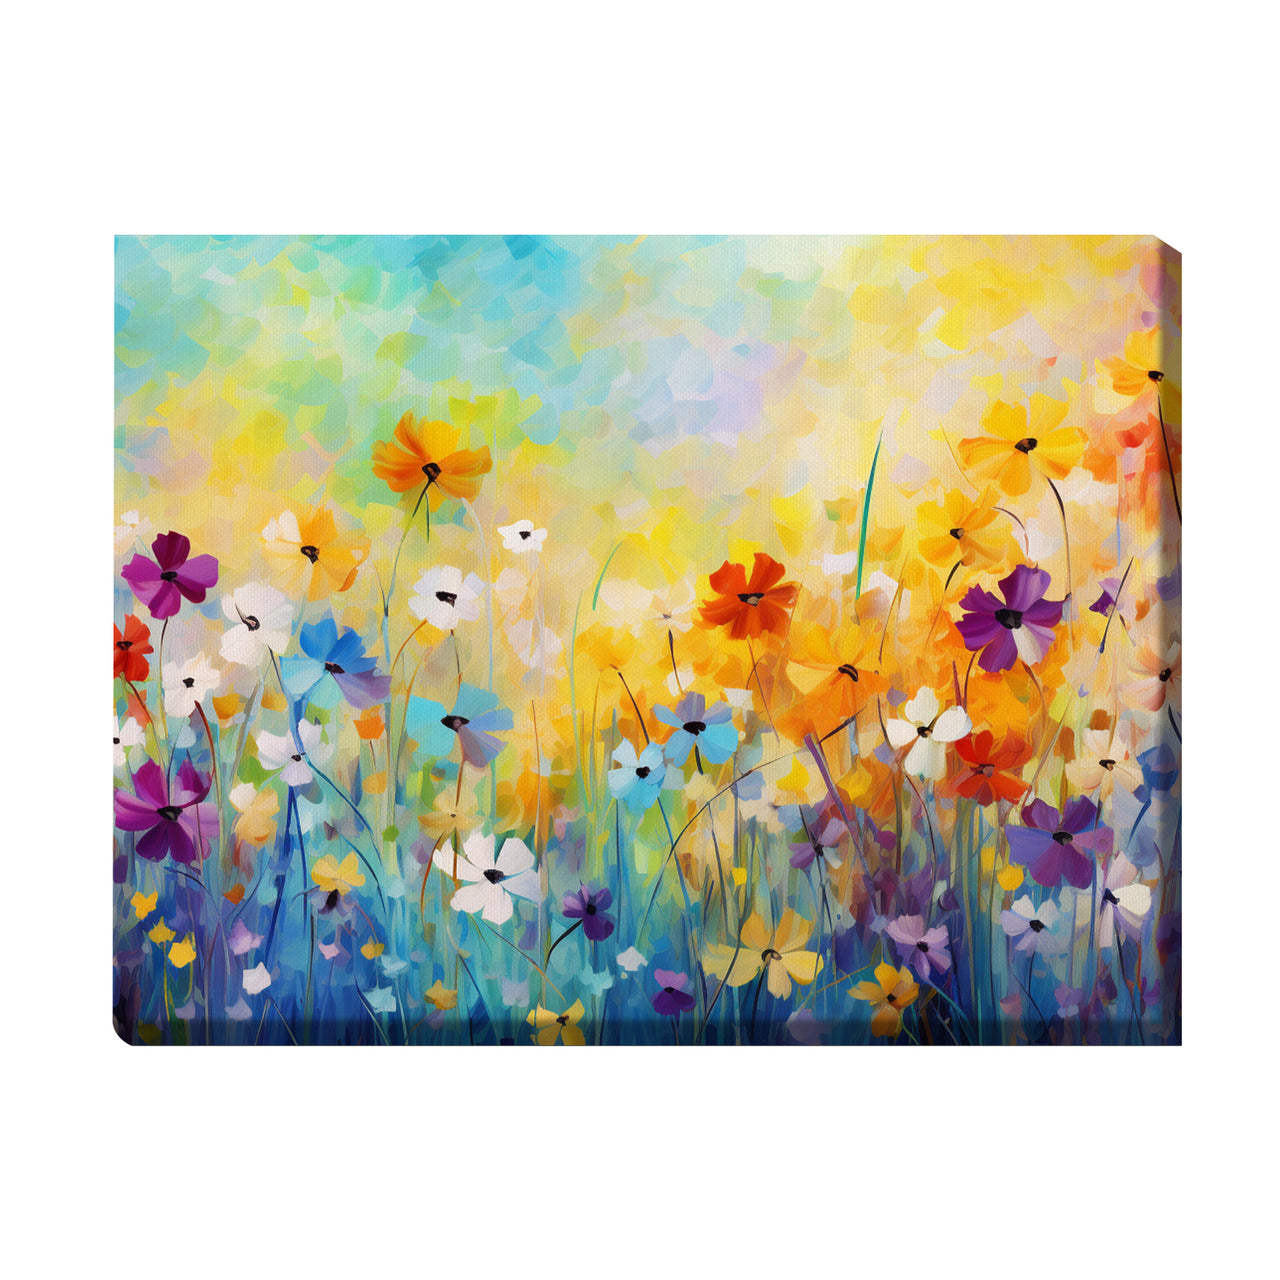 Wildflowers on Canvas, Colorful Wildflower Field Art Print 01, Minimalist Flower Wall Art, Abstract Wall Art, Watercolor flowers, Floral Print, Classic, Rustic Farmhouse, Wildflower Home Decor, Flower Painting Canvas, Floral Wall Art